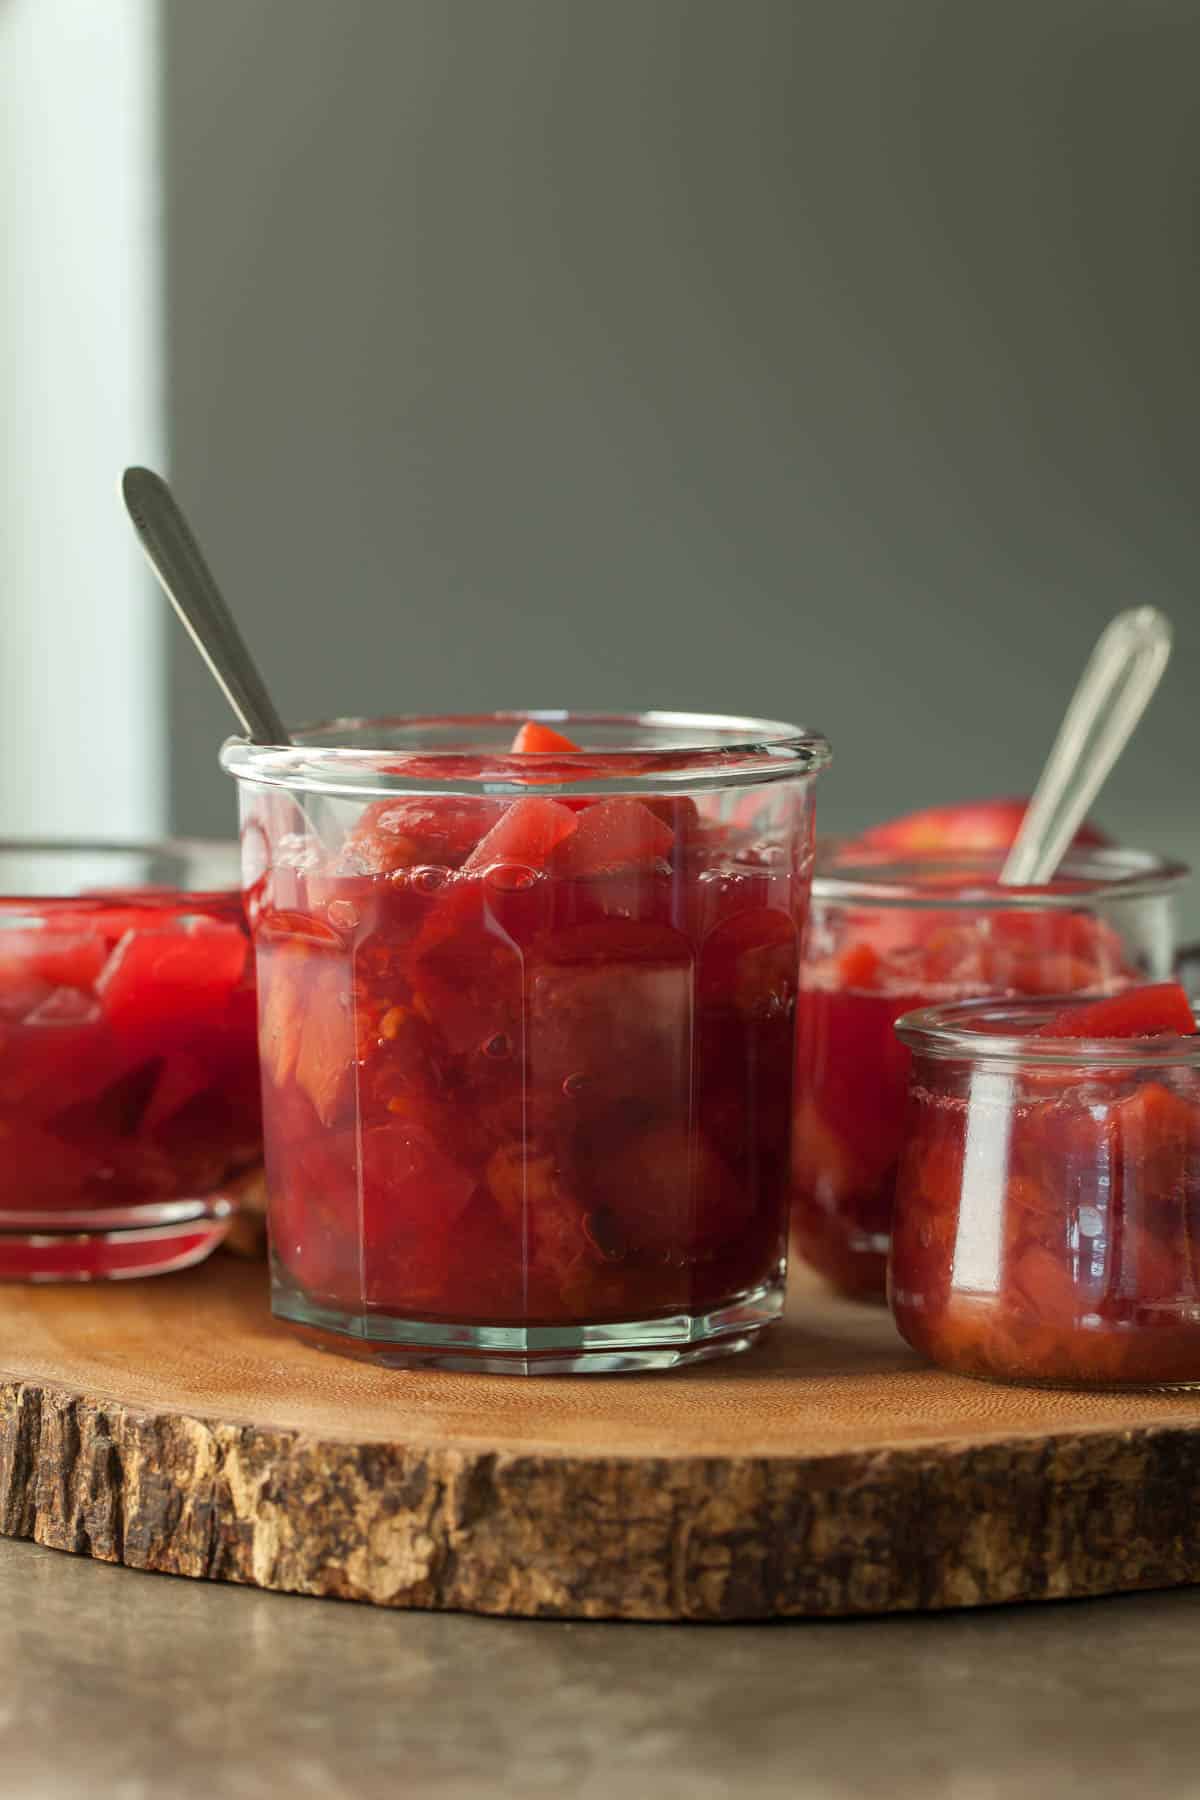 Plum Compote in Jar with Spoon